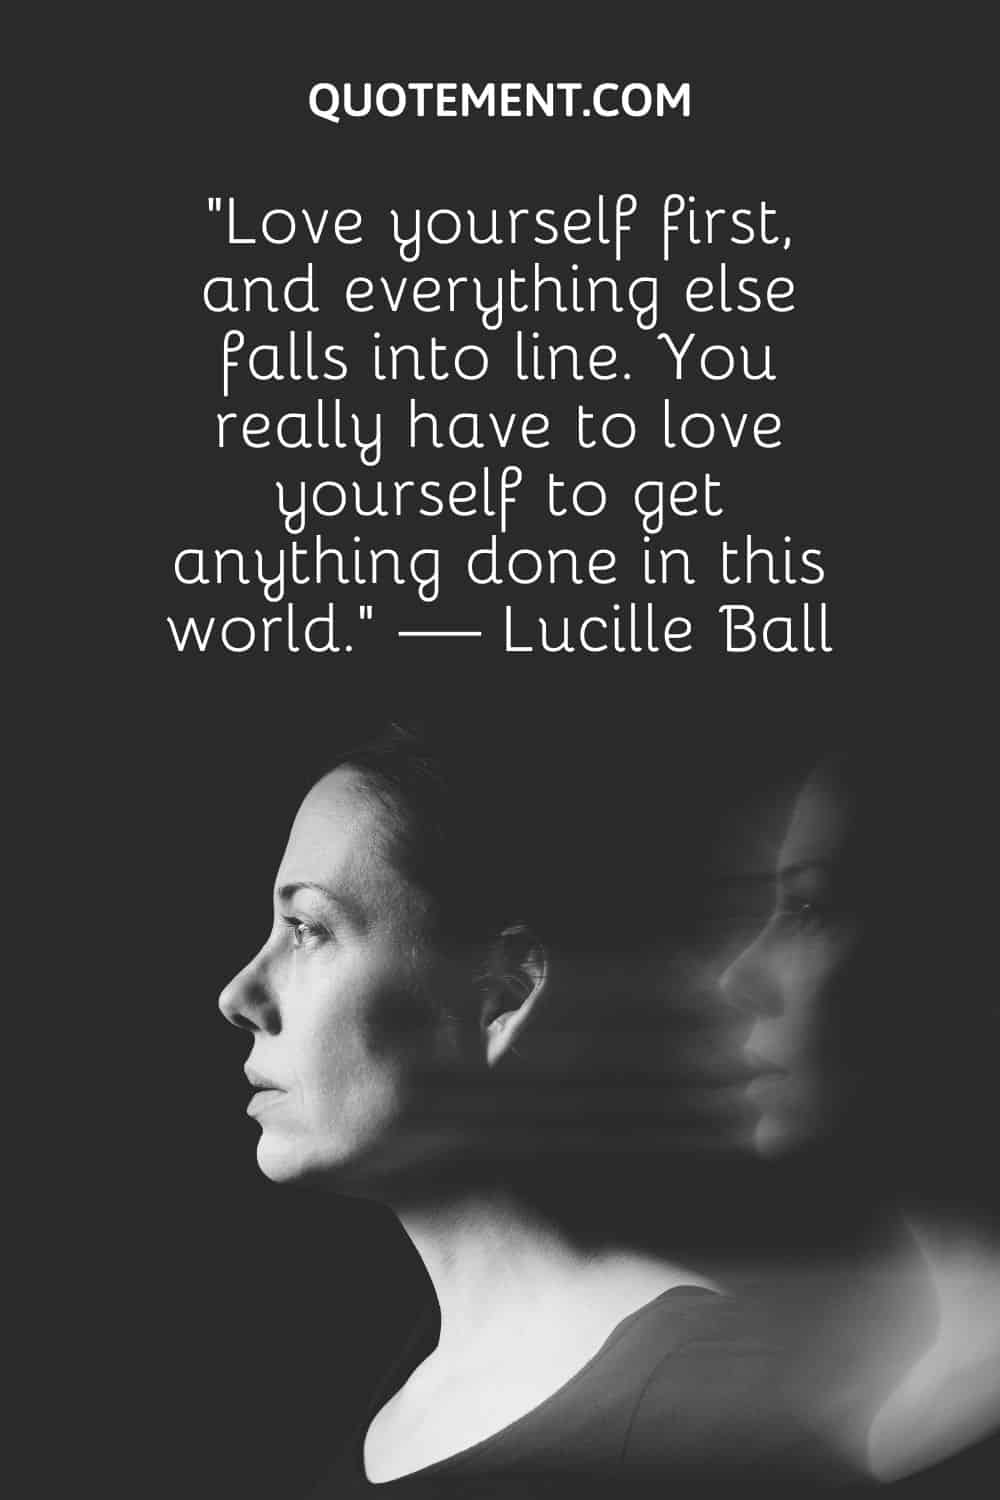 Love yourself first, and everything else falls into line. You really have to love yourself to get anything done in this world. — Lucille Ball